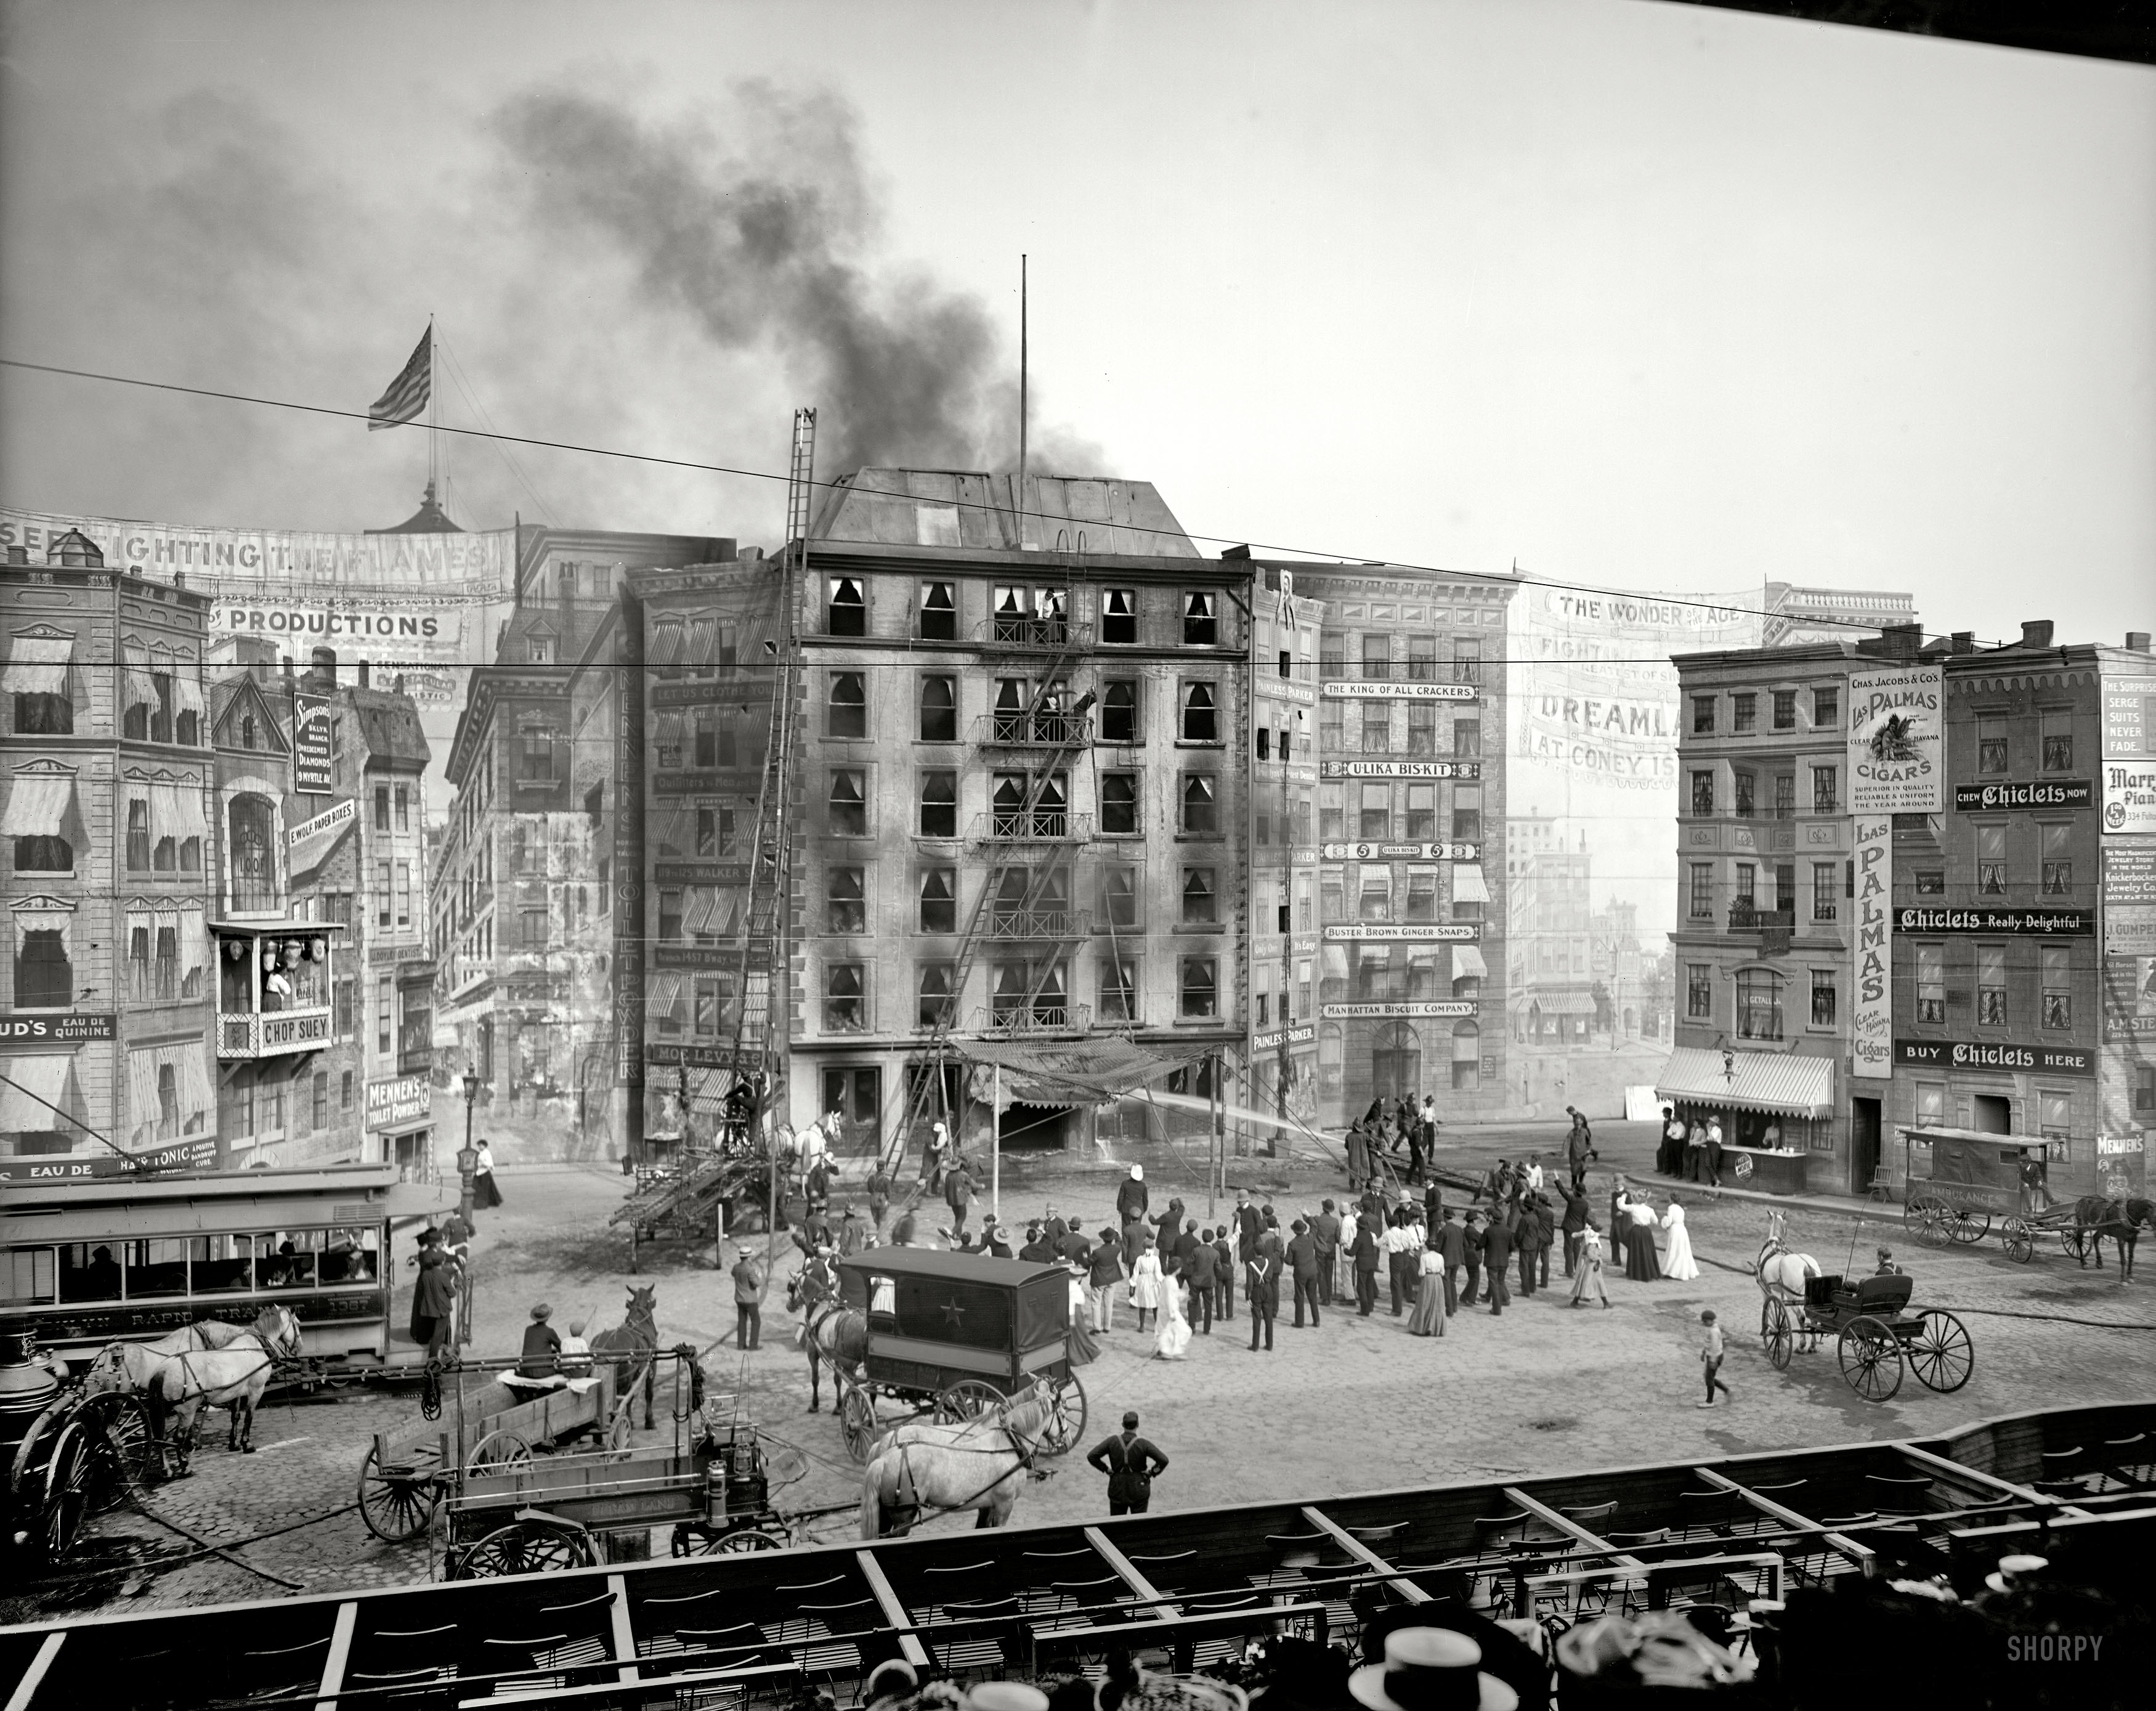 Coney Island, New York, circa 1905. An attraction called "Fighting the Flames." 8x10 inch dry plate glass negative, Detroit Publishing Company. View full size.